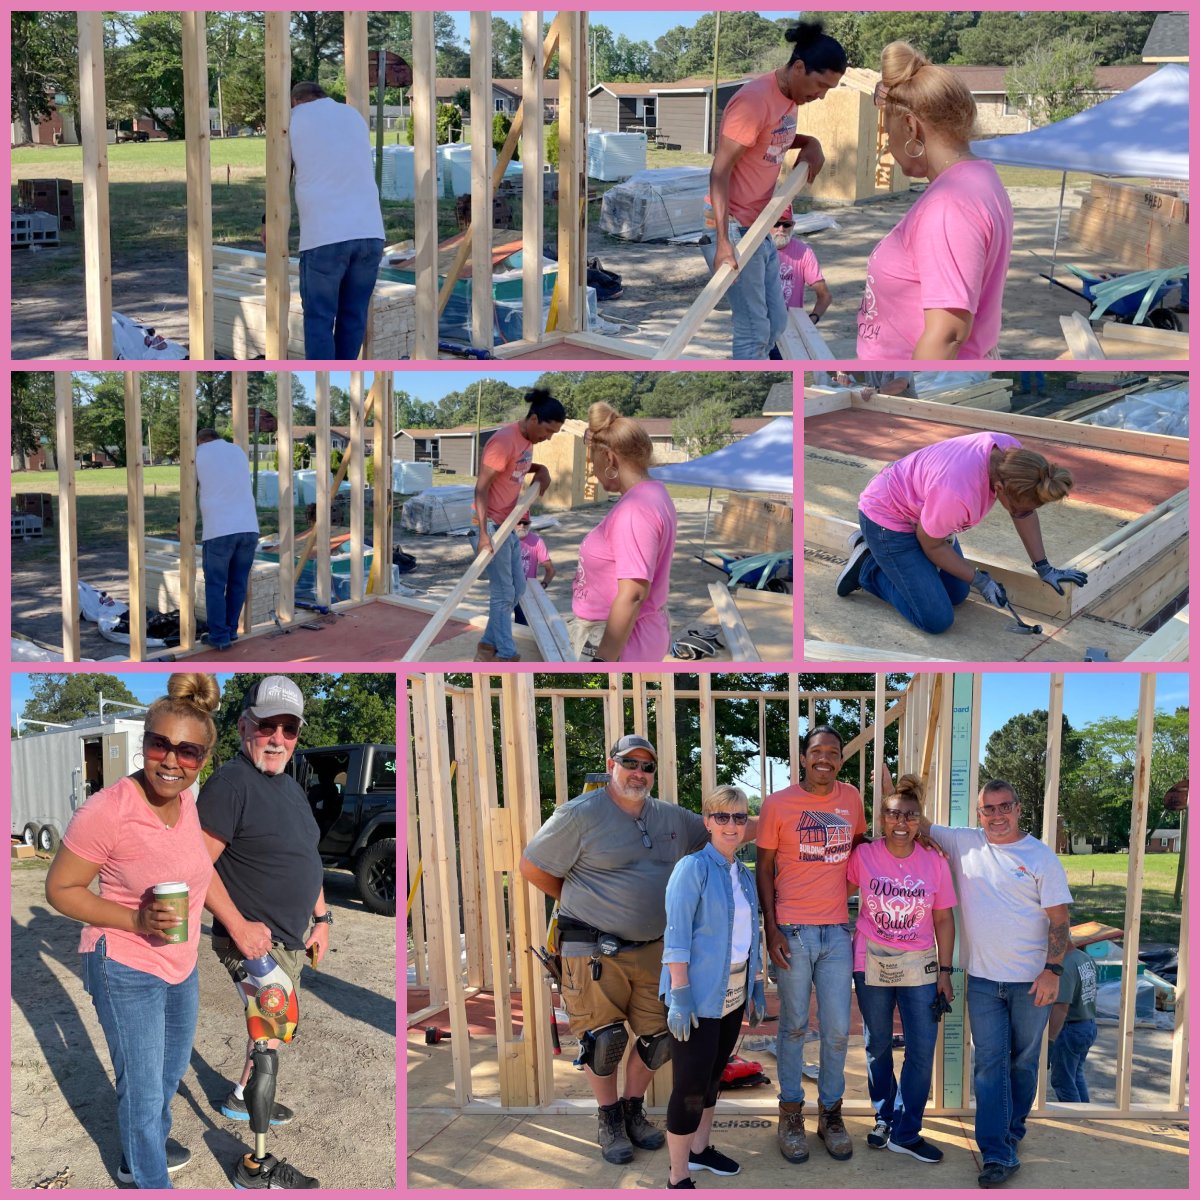 I still have my general contractors license, and I know how to use the gavel in court, but I was admittedly a little rusty swinging that hammer! But, oh, what a great time and beautiful weather for helping build a Habitat for Humanity home in Wayne County.  #HabitatforHumanity